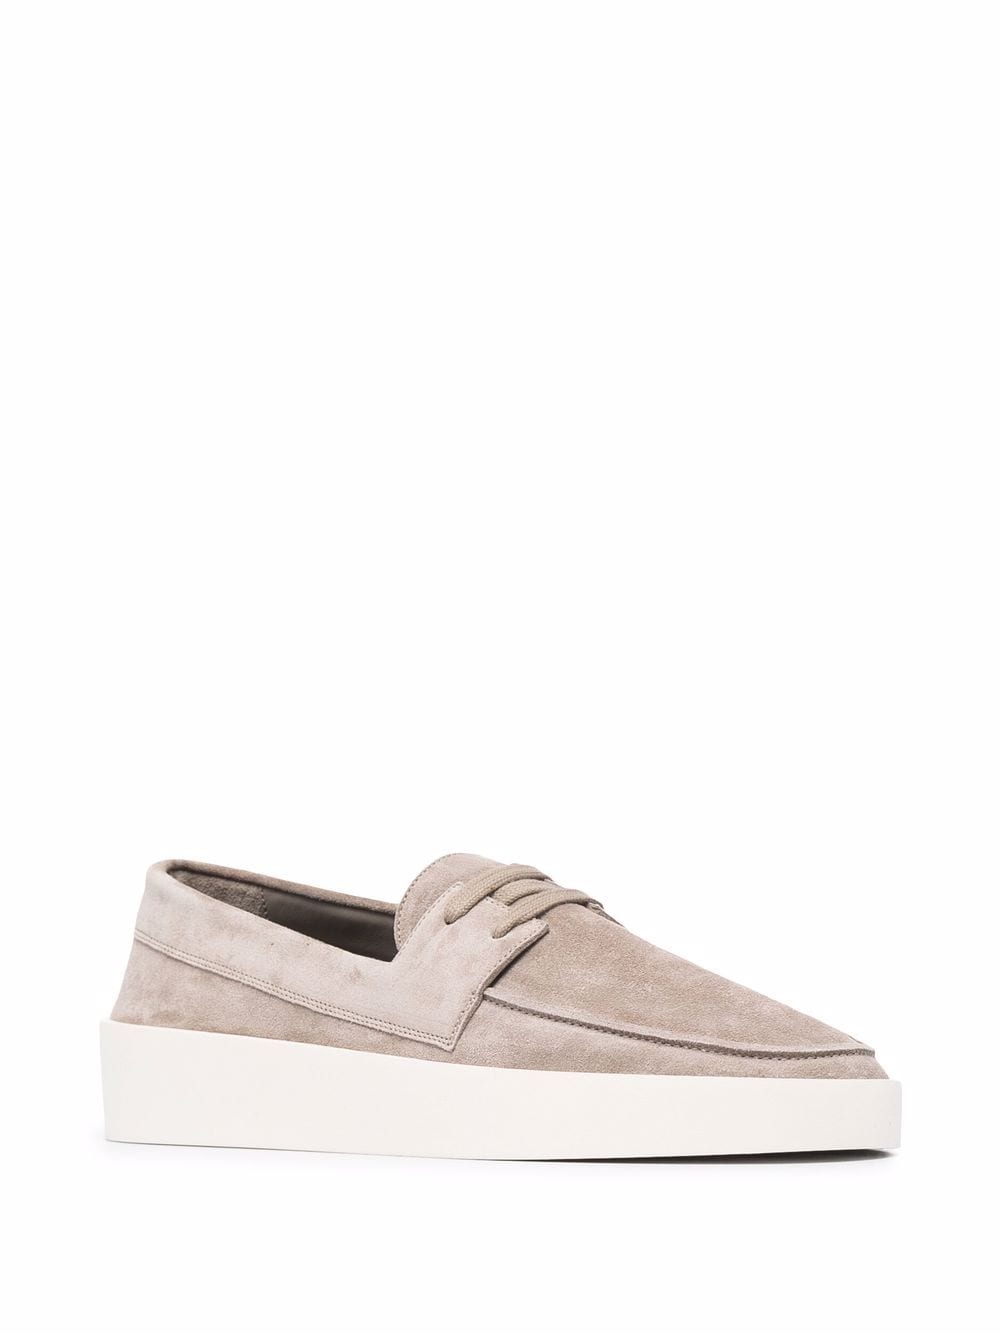 FEAR OF GOD Laced Suede Loafers Brown - MAISONDEFASHION.COM